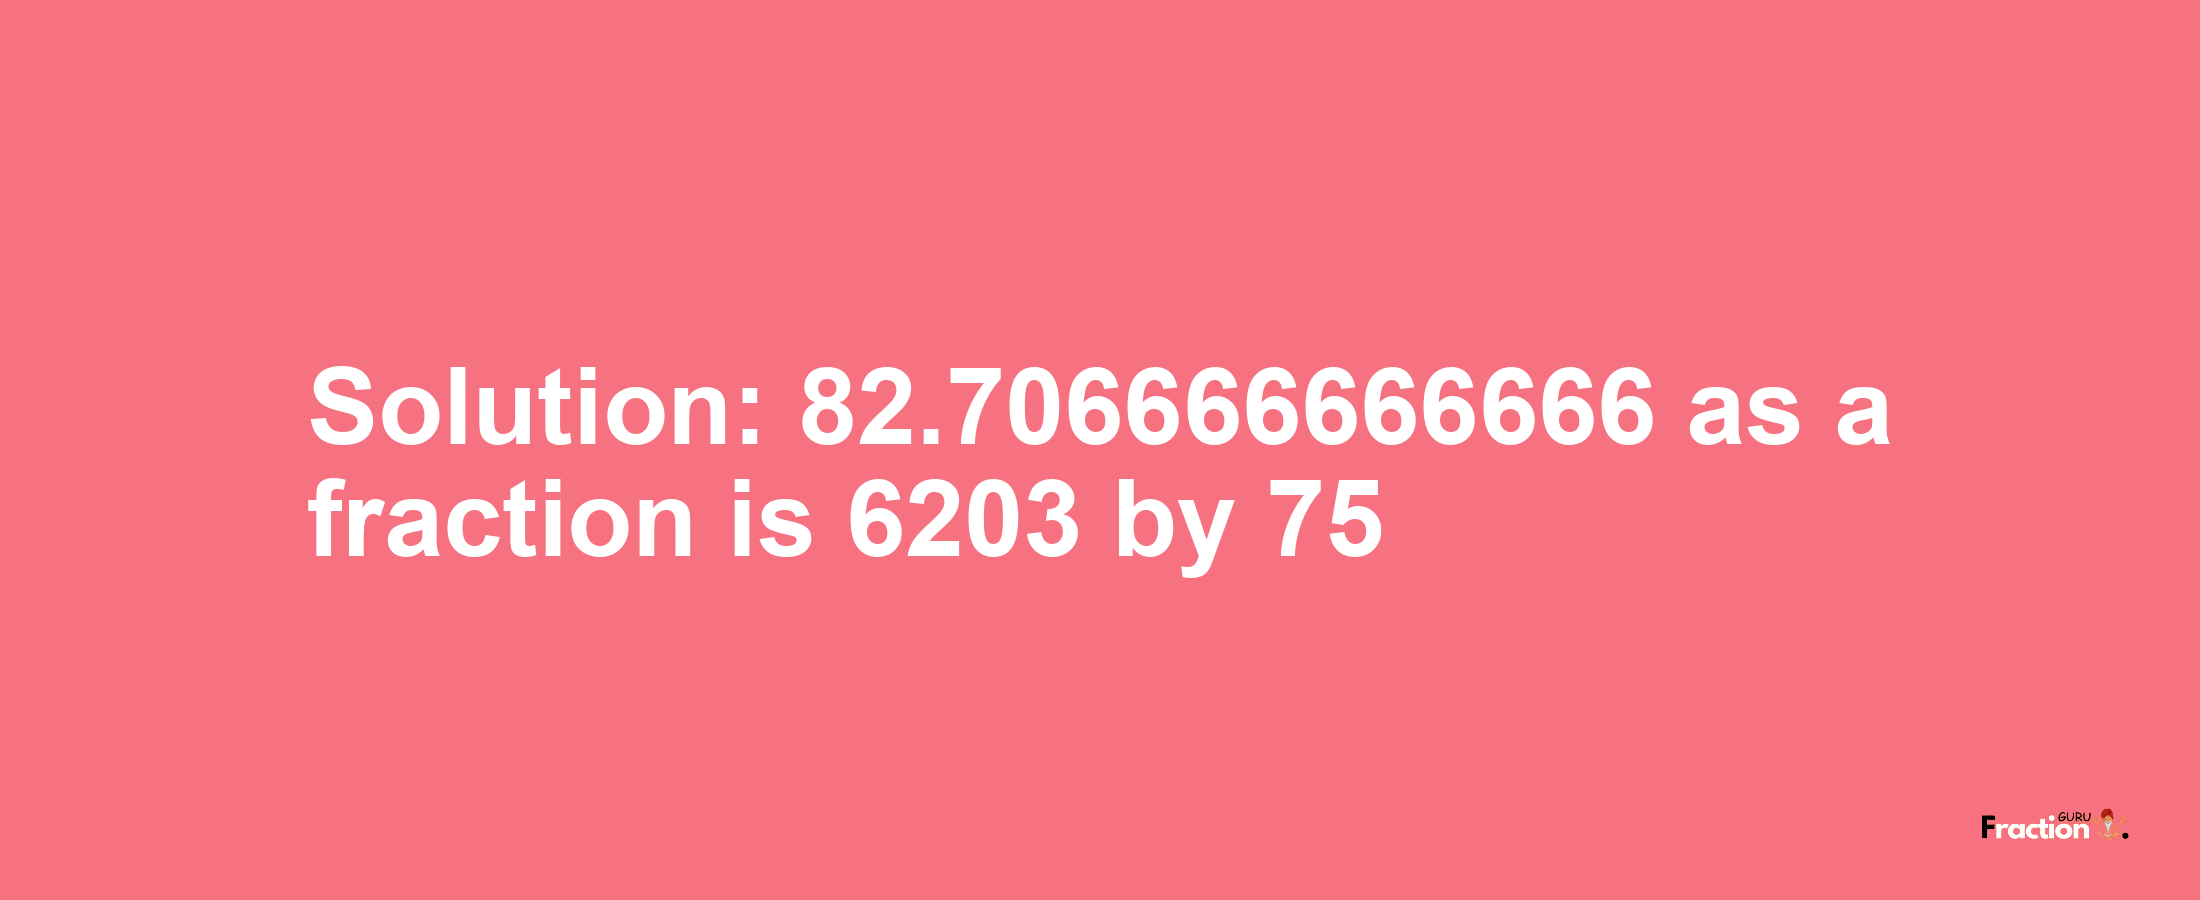 Solution:82.706666666666 as a fraction is 6203/75